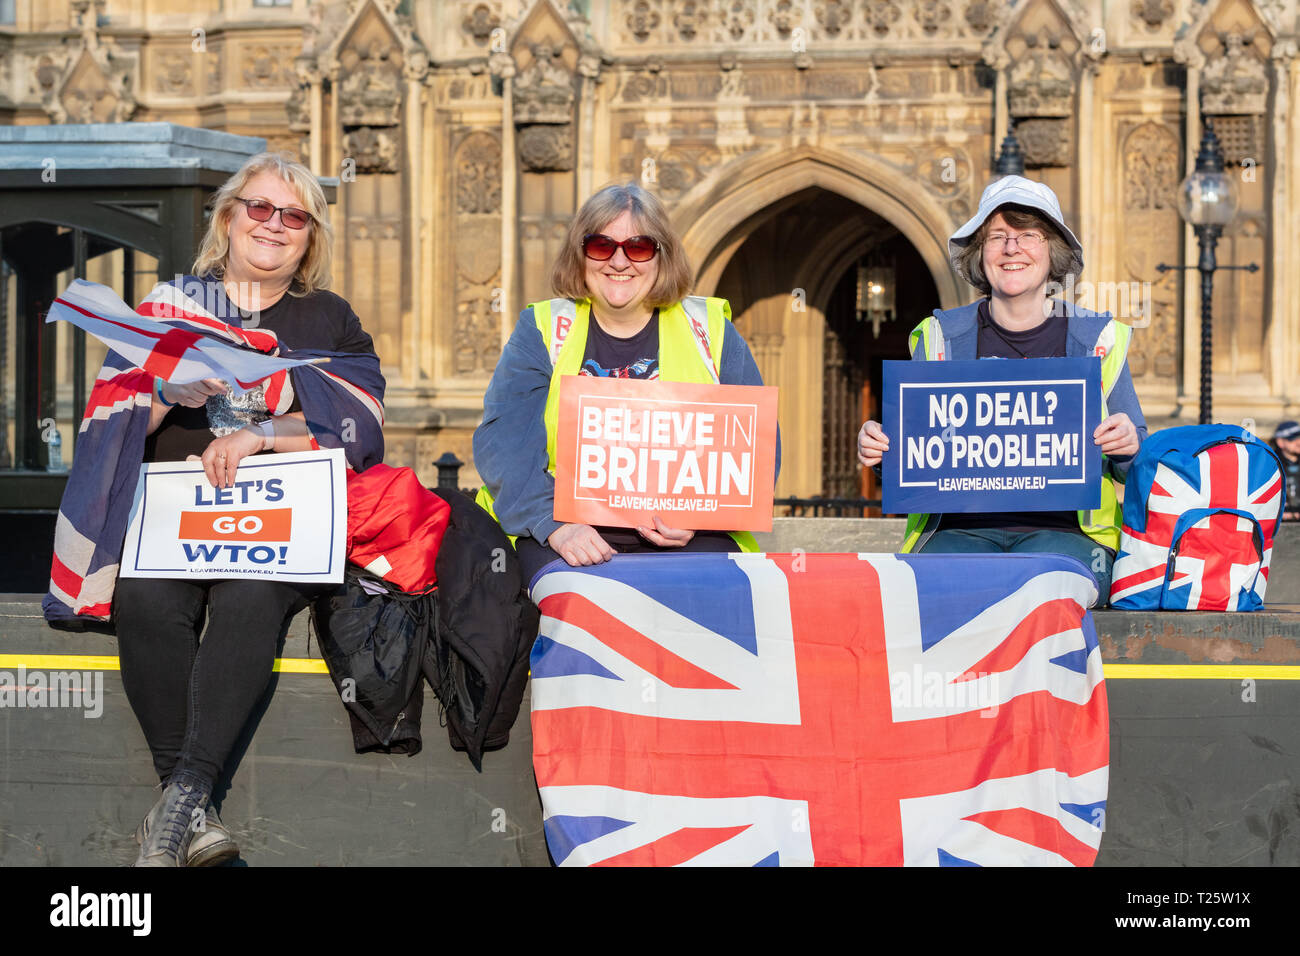 Westminster, London, UK; 29th March 2019; Three Female Pro-Brexit Demonstrators Sit on Security Barrier Outside Parliament Holding Pro-Brexit Signs Stock Photo